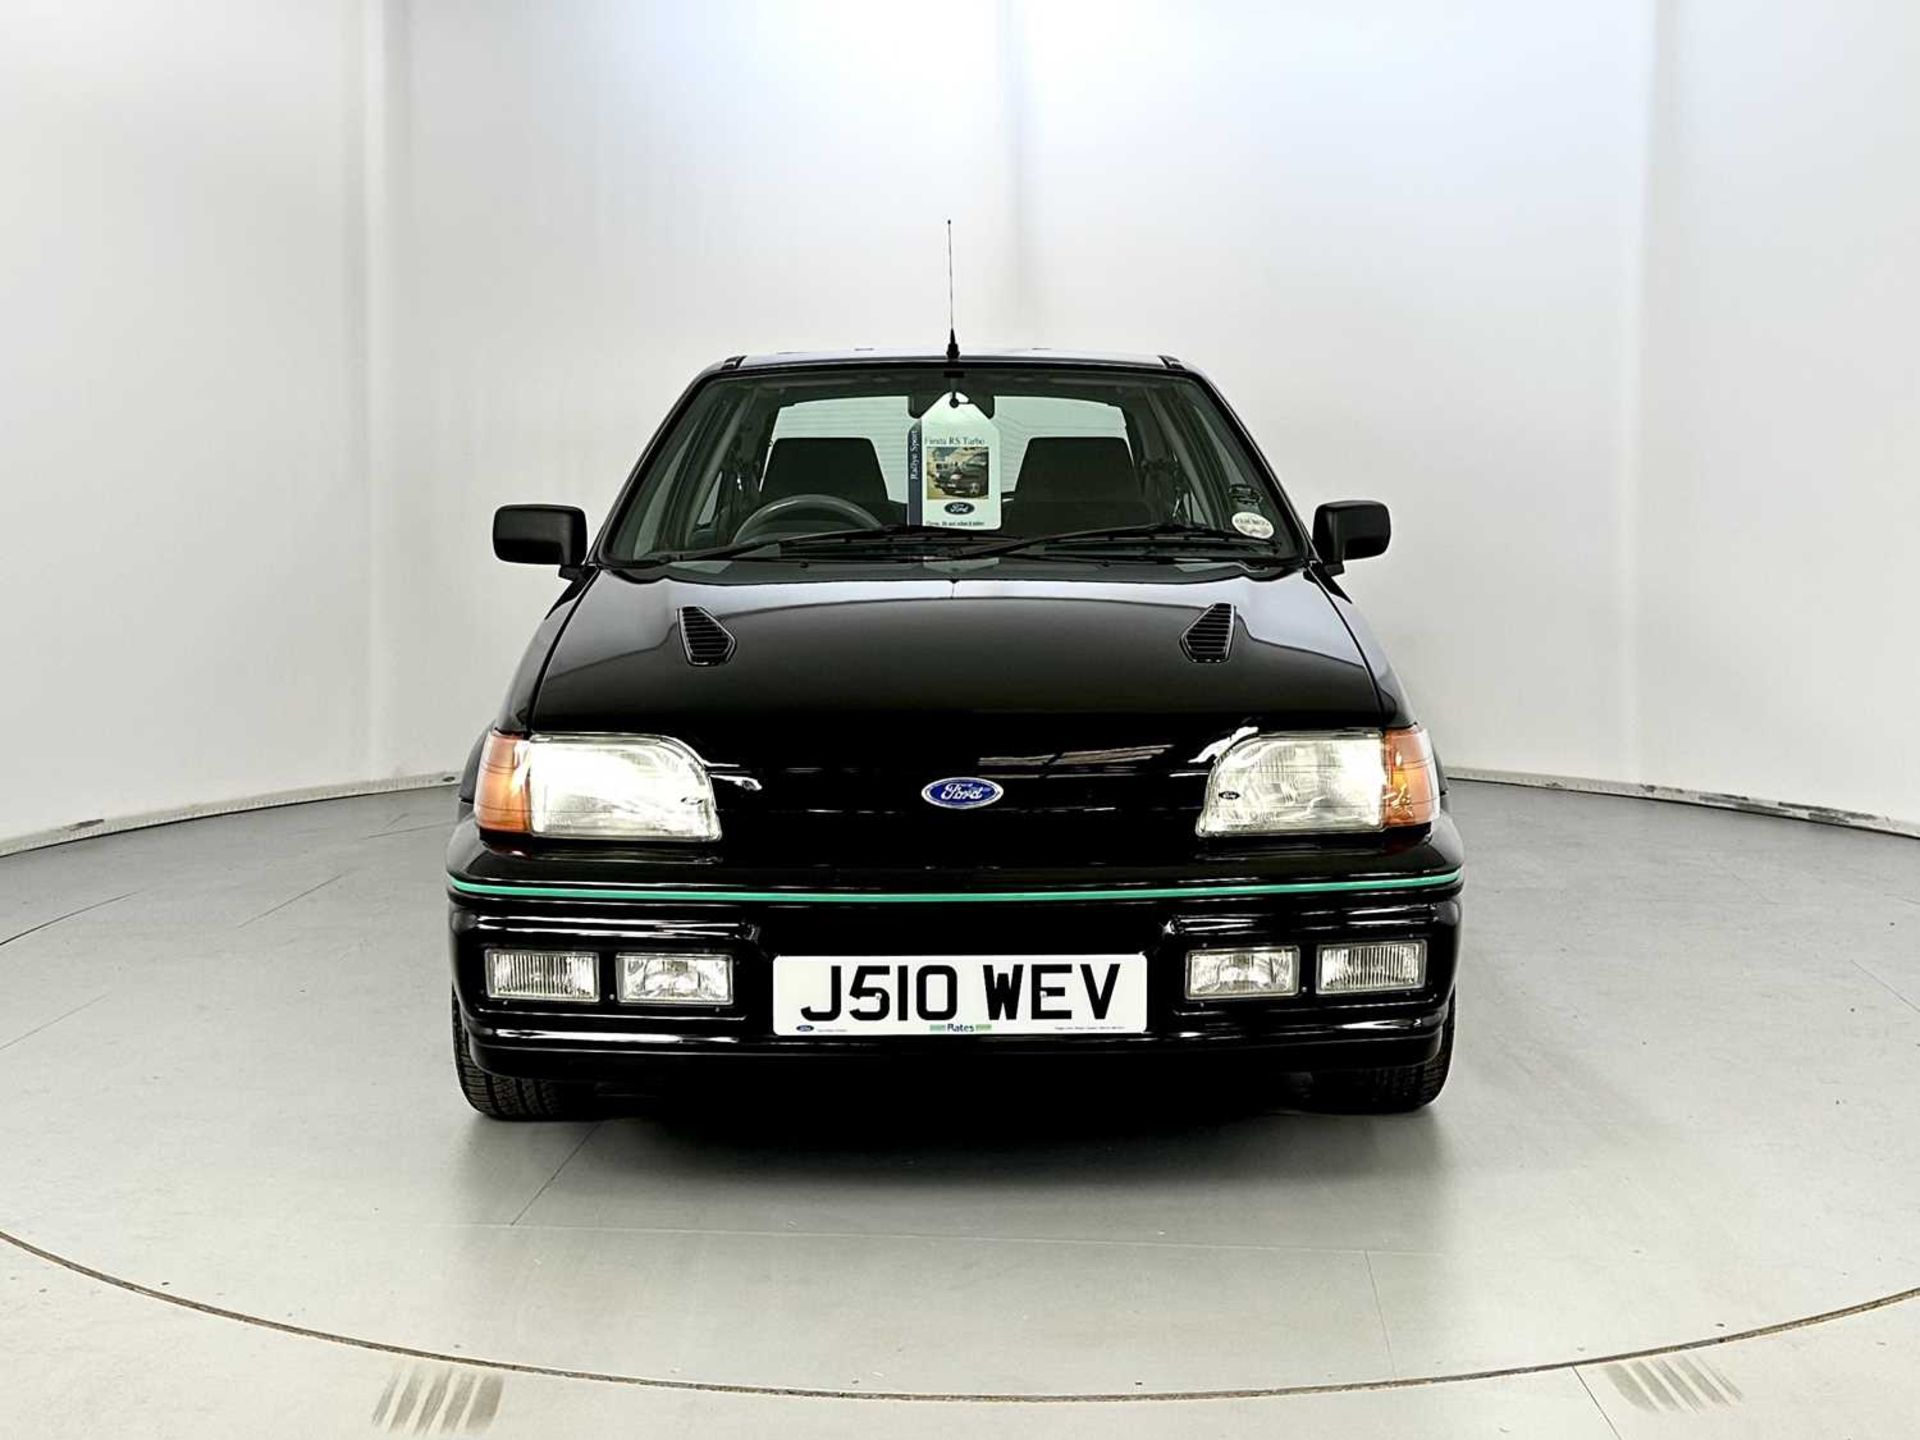 1991 Ford Fiesta RS Turbo Spectacular Original Condition  - Image 2 of 40